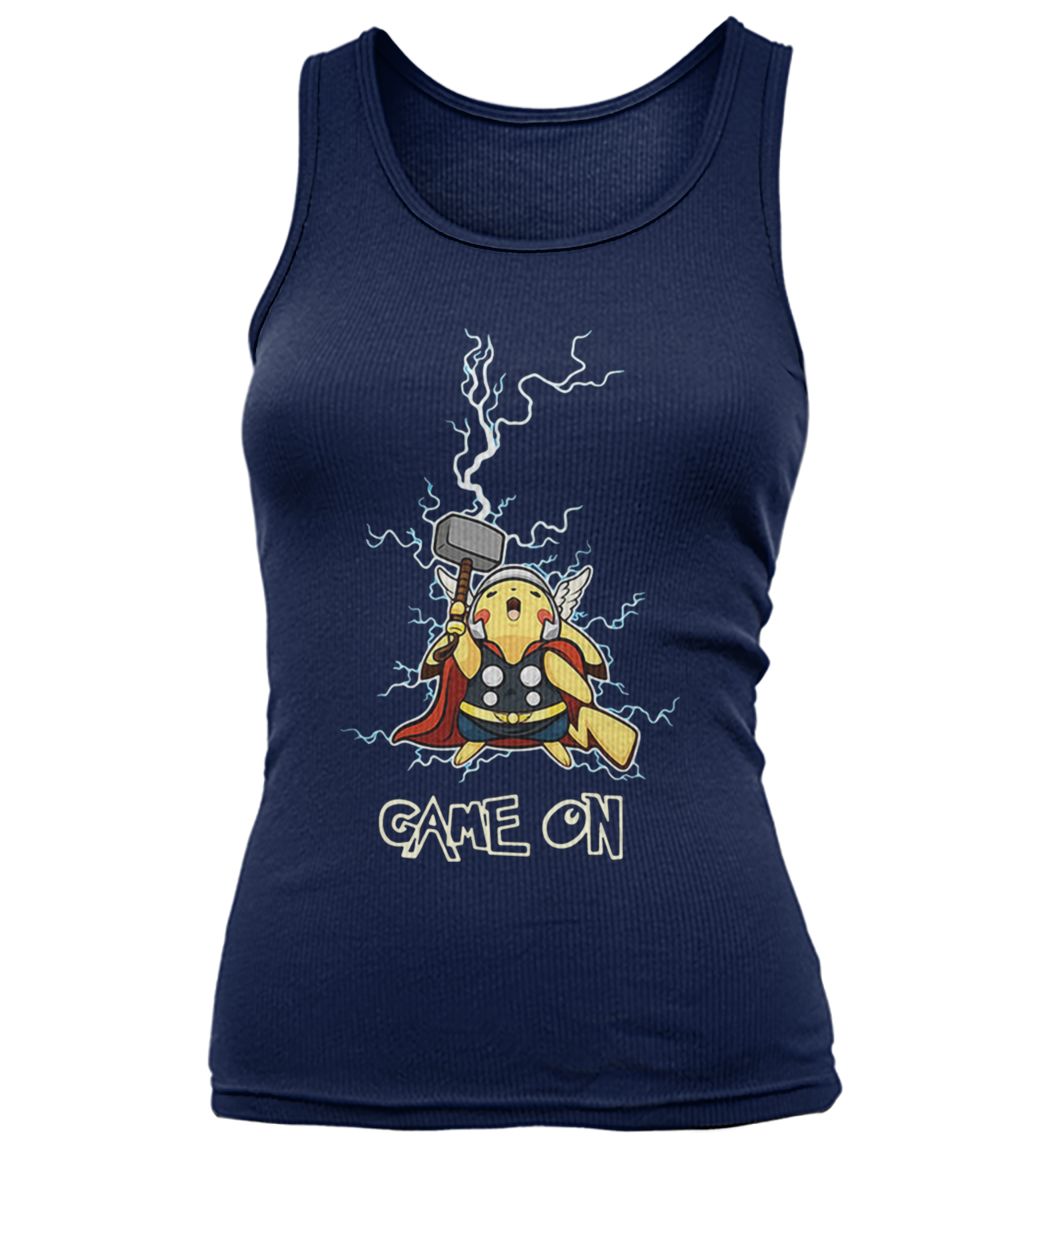 Pikachu being the god of thunder thor game on women's tank top